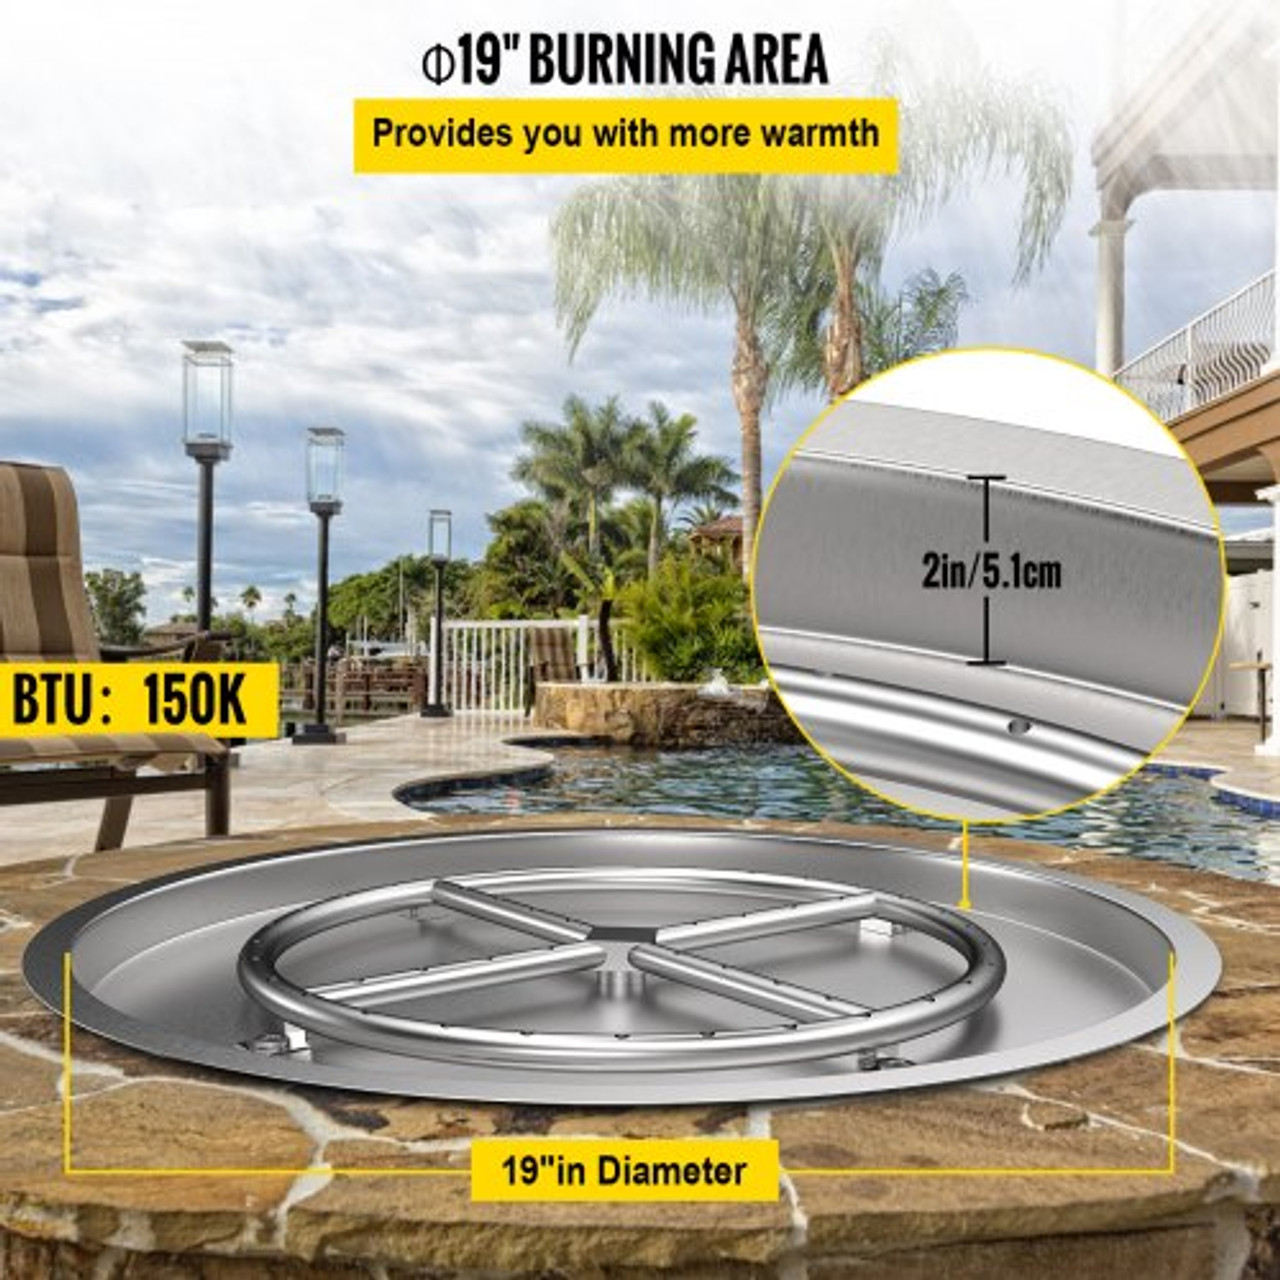 Drop in Fire Pit Pan, 19" x 19" Round Fire Pit Burner, Stainless Steel Gas Fire Pan, Fire Pit Burner Pan w/ 1 Pack Volcanic Rock Fire Pit Insert w/ 90K BTU for Keeping Warm w/ Family & Friends